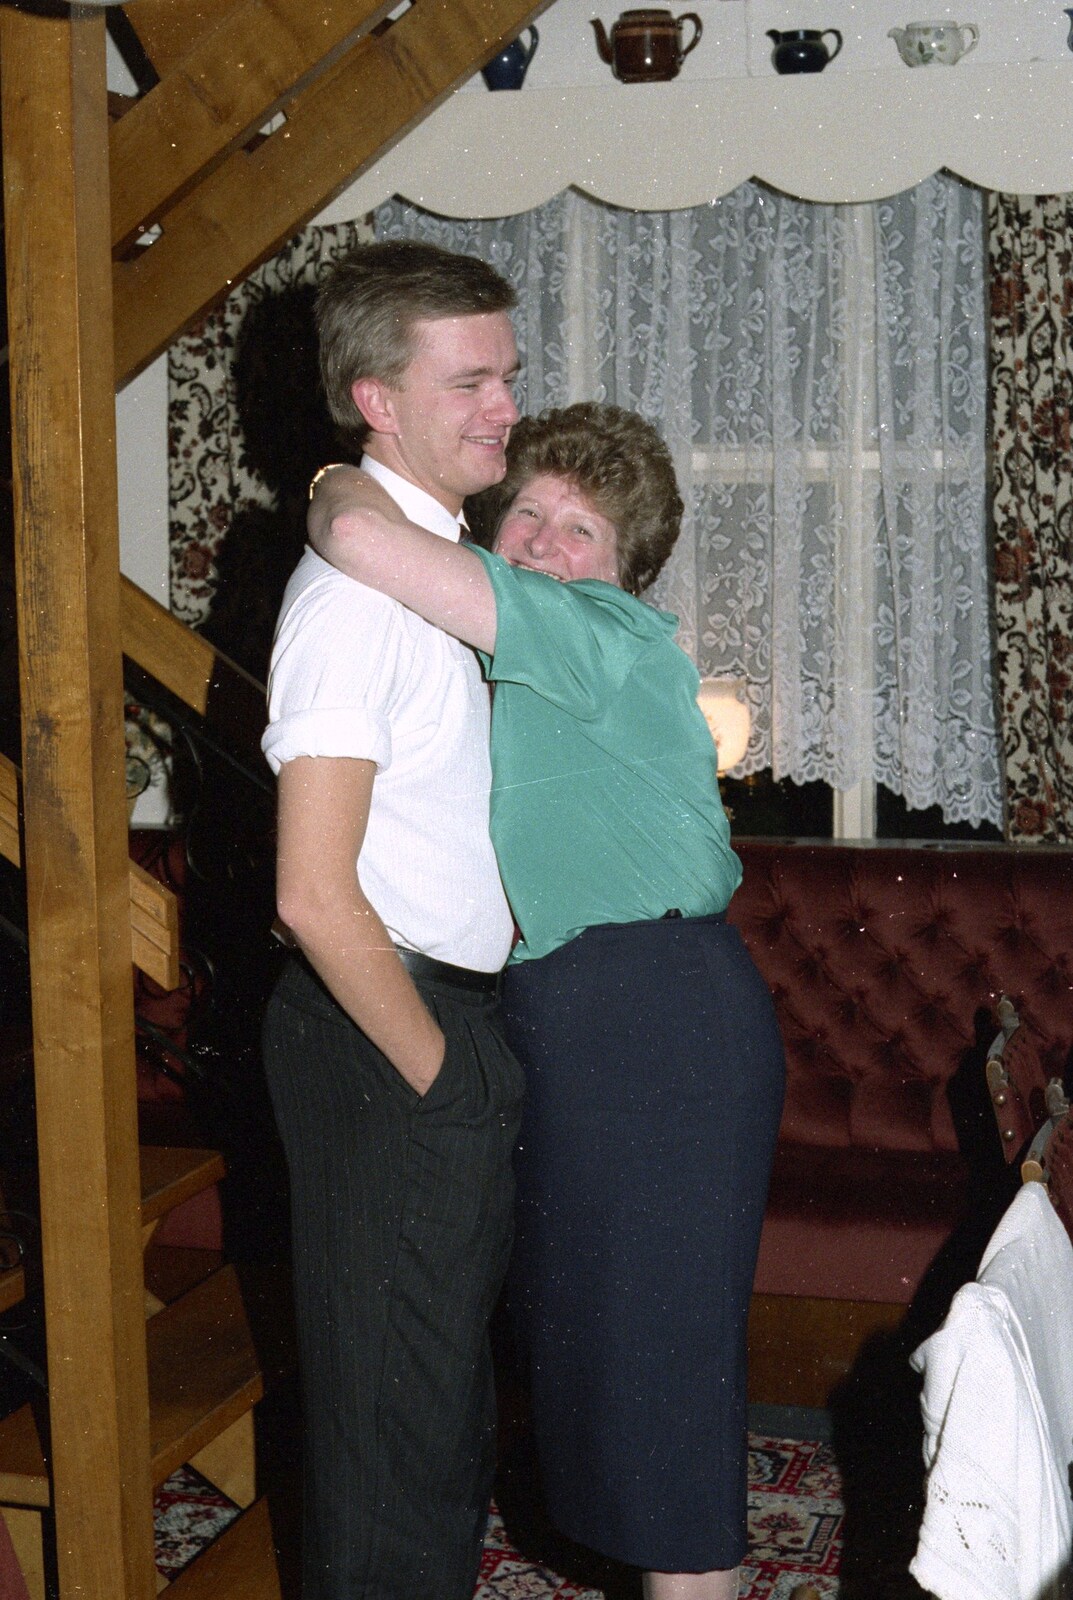 Nosher gets a hug from Spam from Bonfire Night and Printec at the Stoke Ash White Horse, Suffolk - 5th November 1991